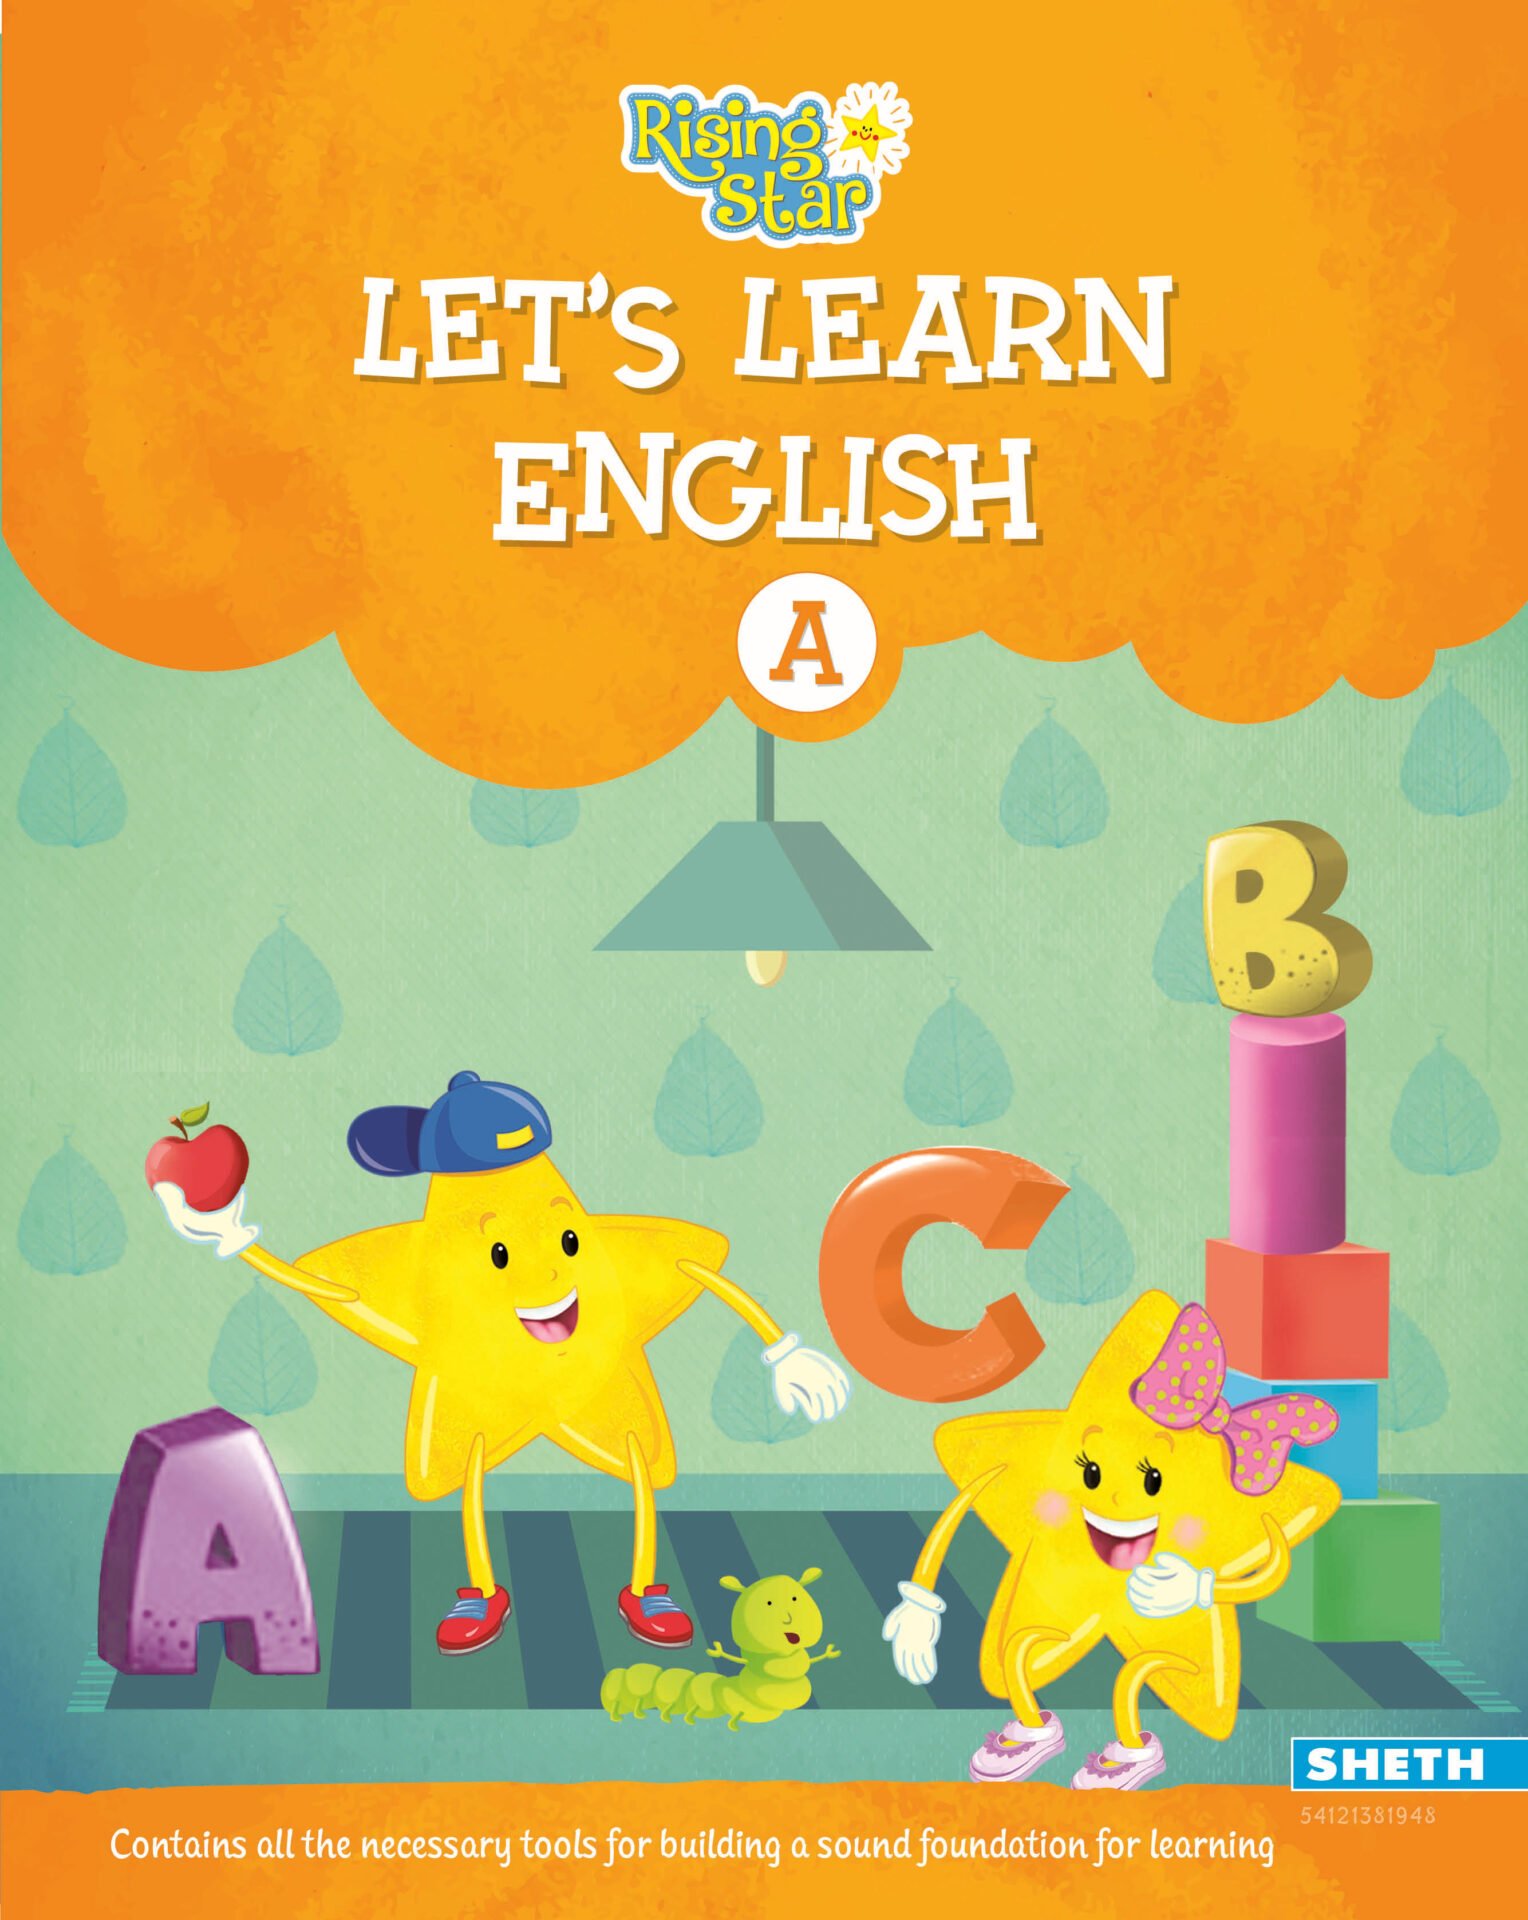 Rising Star Lets Learn English A 0 1